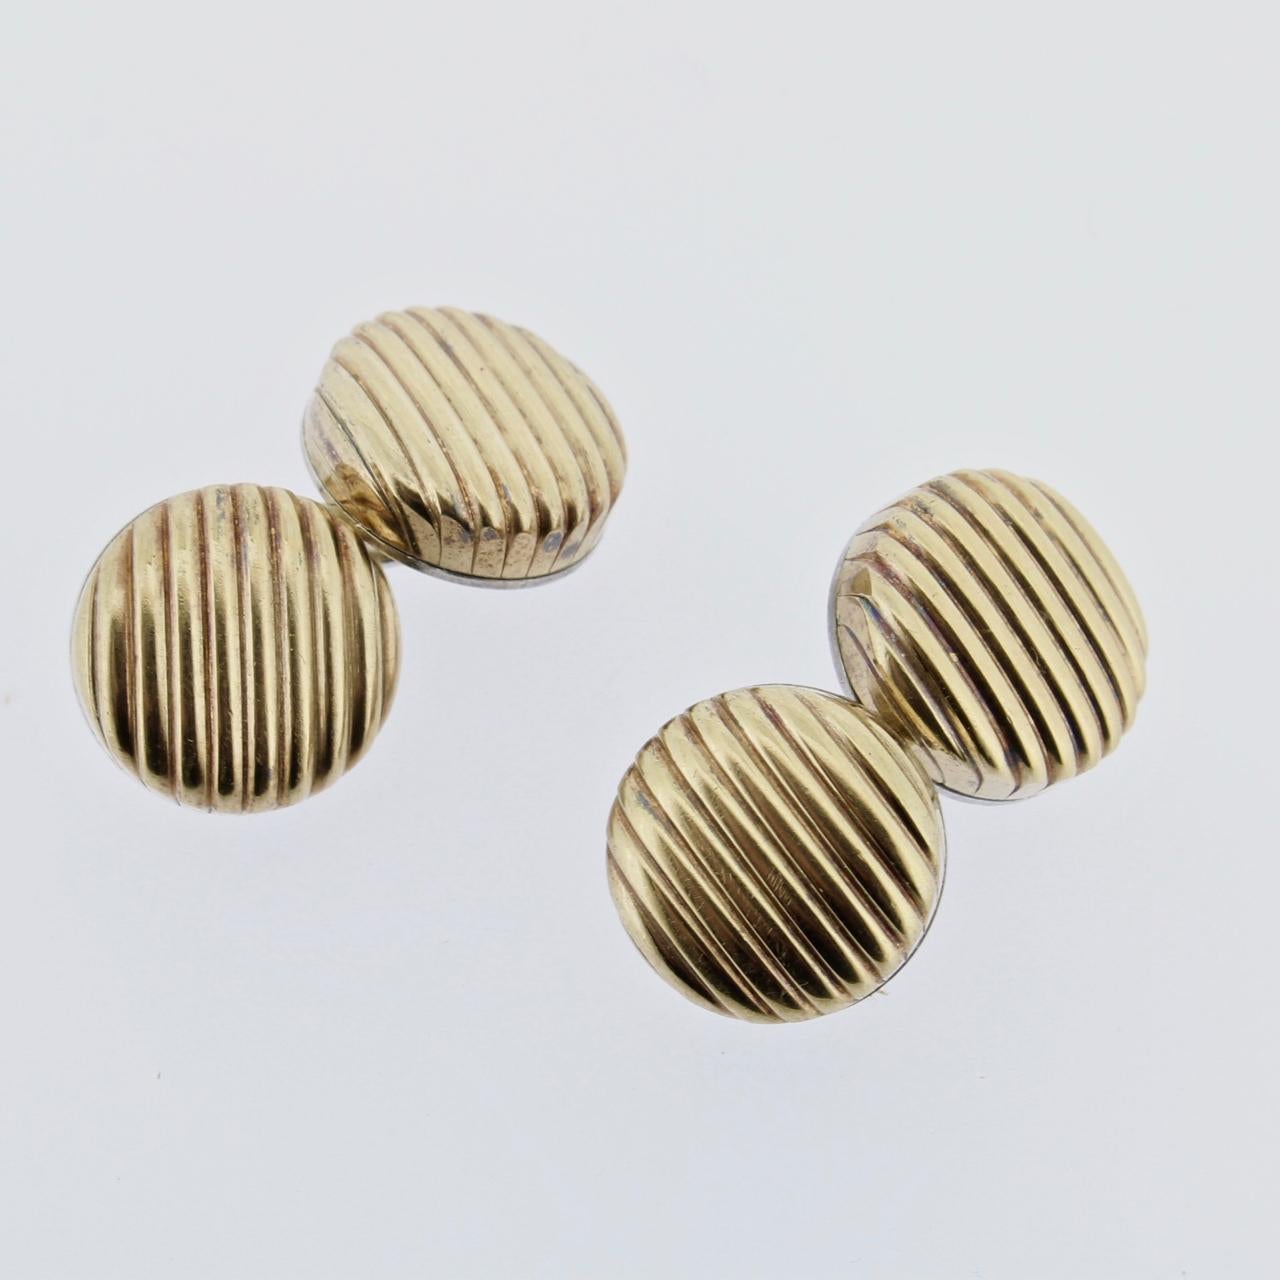 A good pair of Paul Stuart ribbed button-form cufflinks in gilt sterling silver.

Crafted by Kosca SRL for Paul Stuart in Milan, Italy in the 1970s or 80s.

Reverse marked Paul Stuart, Italy, 925, and 53 MI.

Diameter each: ca. 1/2 in.

Items